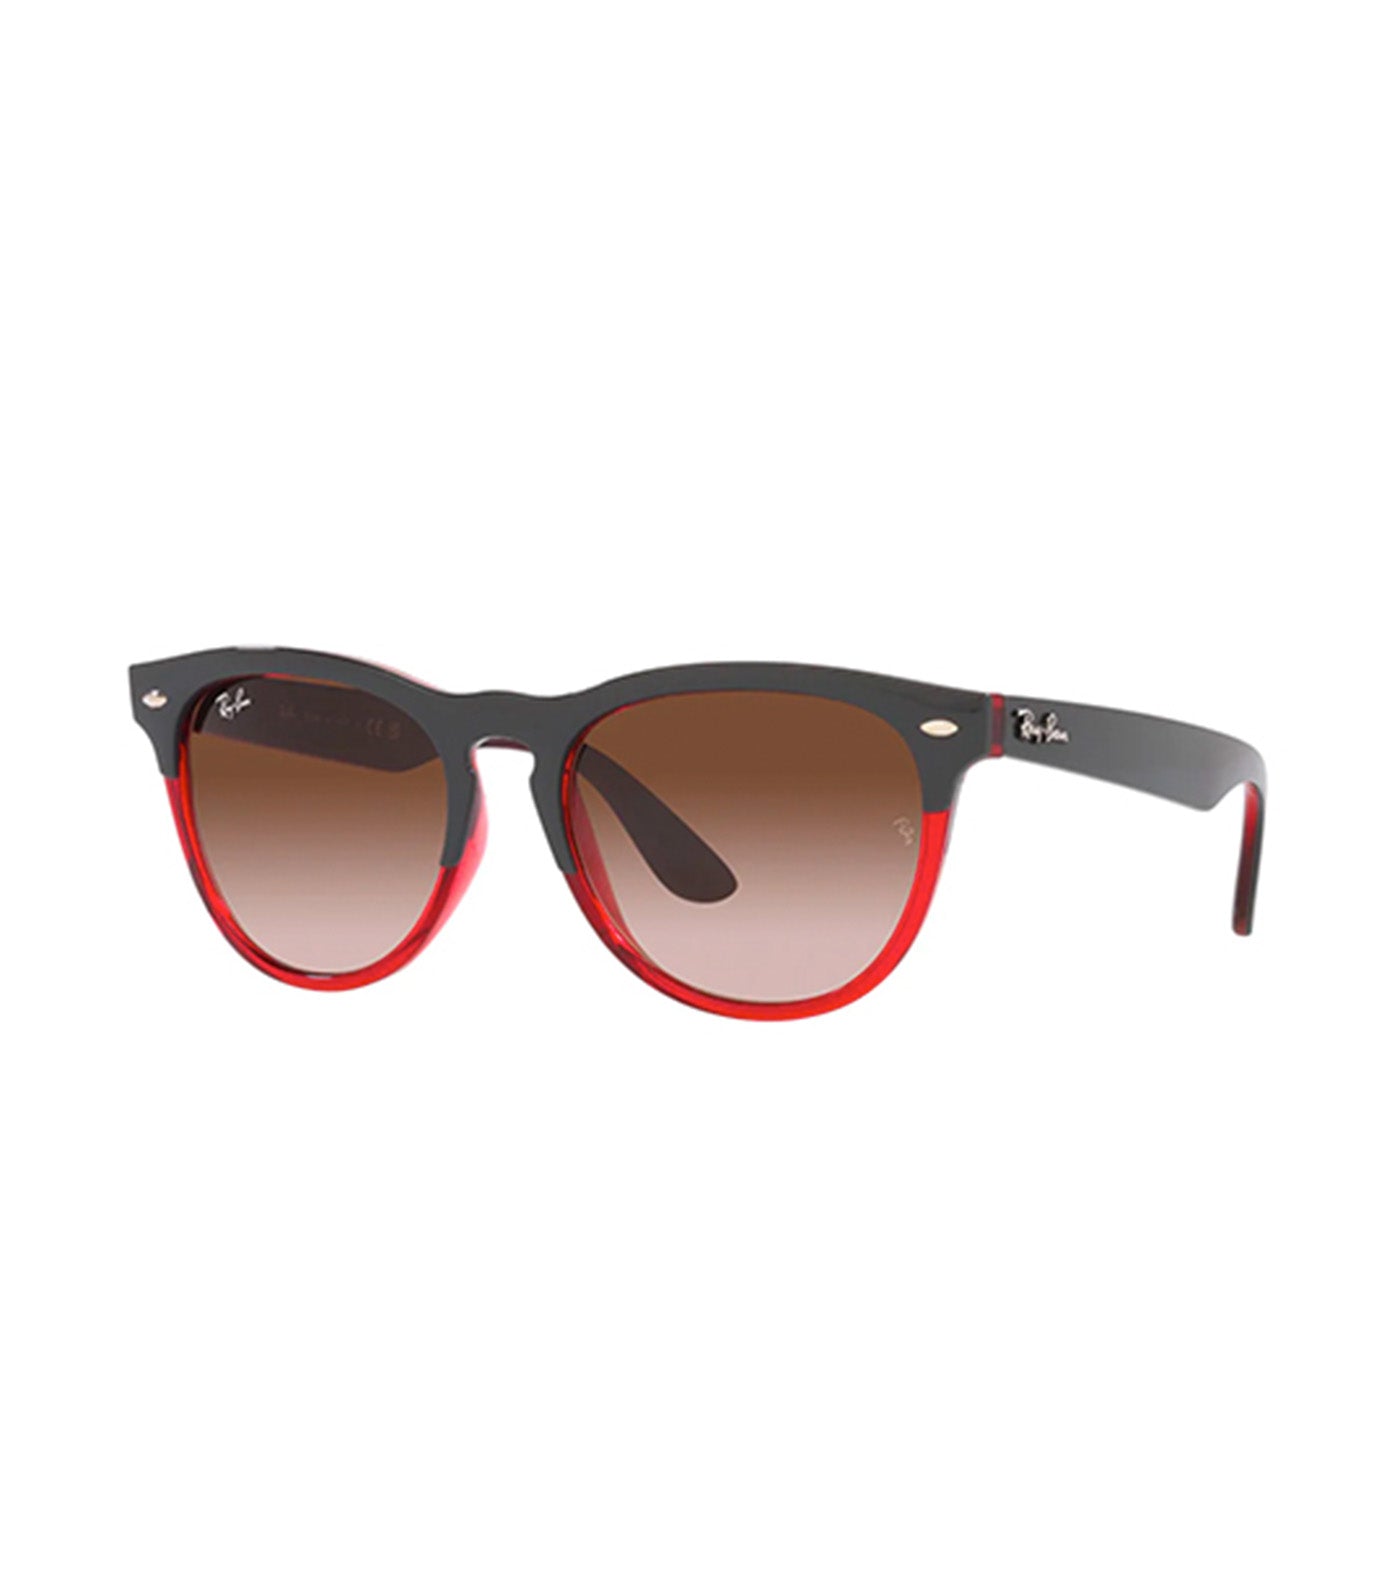 RB4471 Iris Sunglasses Transparent Red and Brown